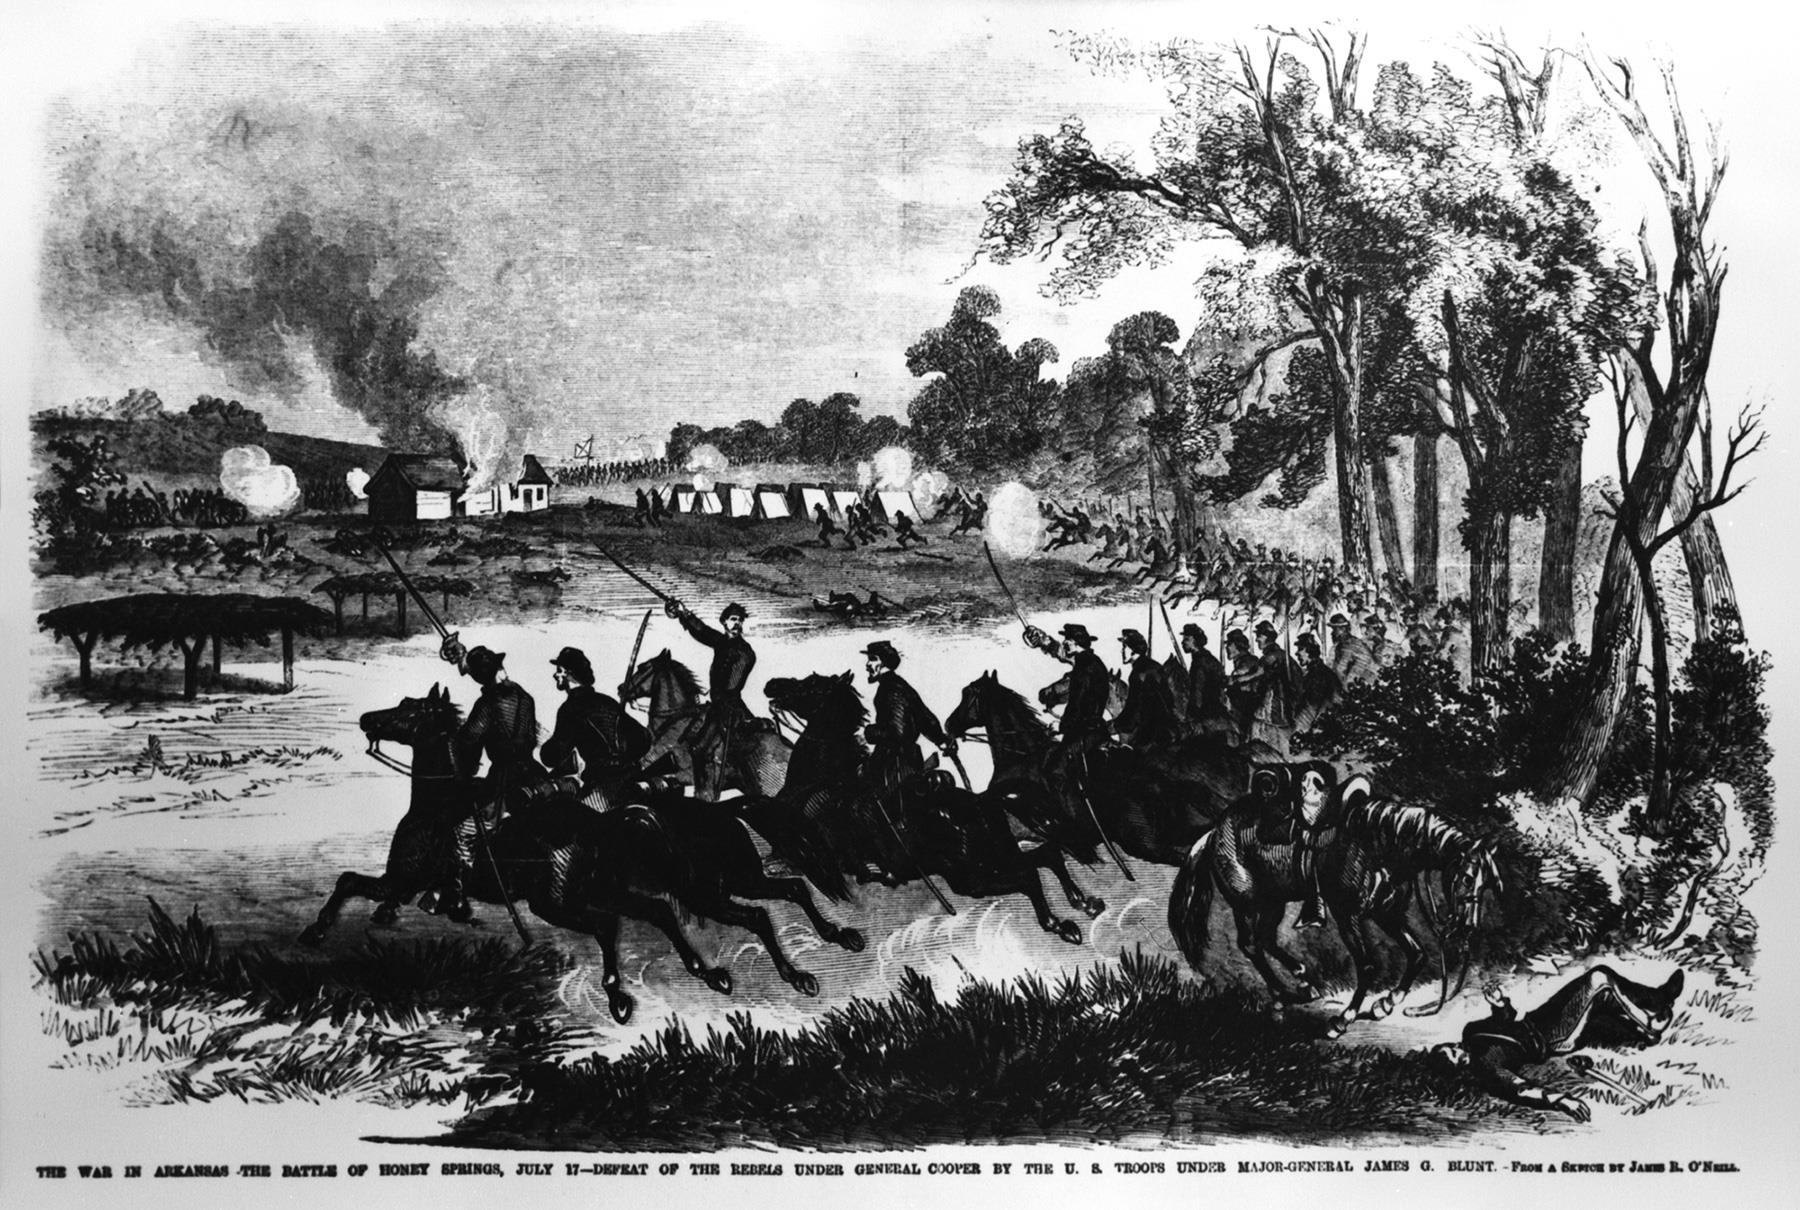 A historic illustration of a group of mounted soldiers in the foreground clustered together.  Multiple men hold their weapsons aloft as the group rides toward others in the distance. 